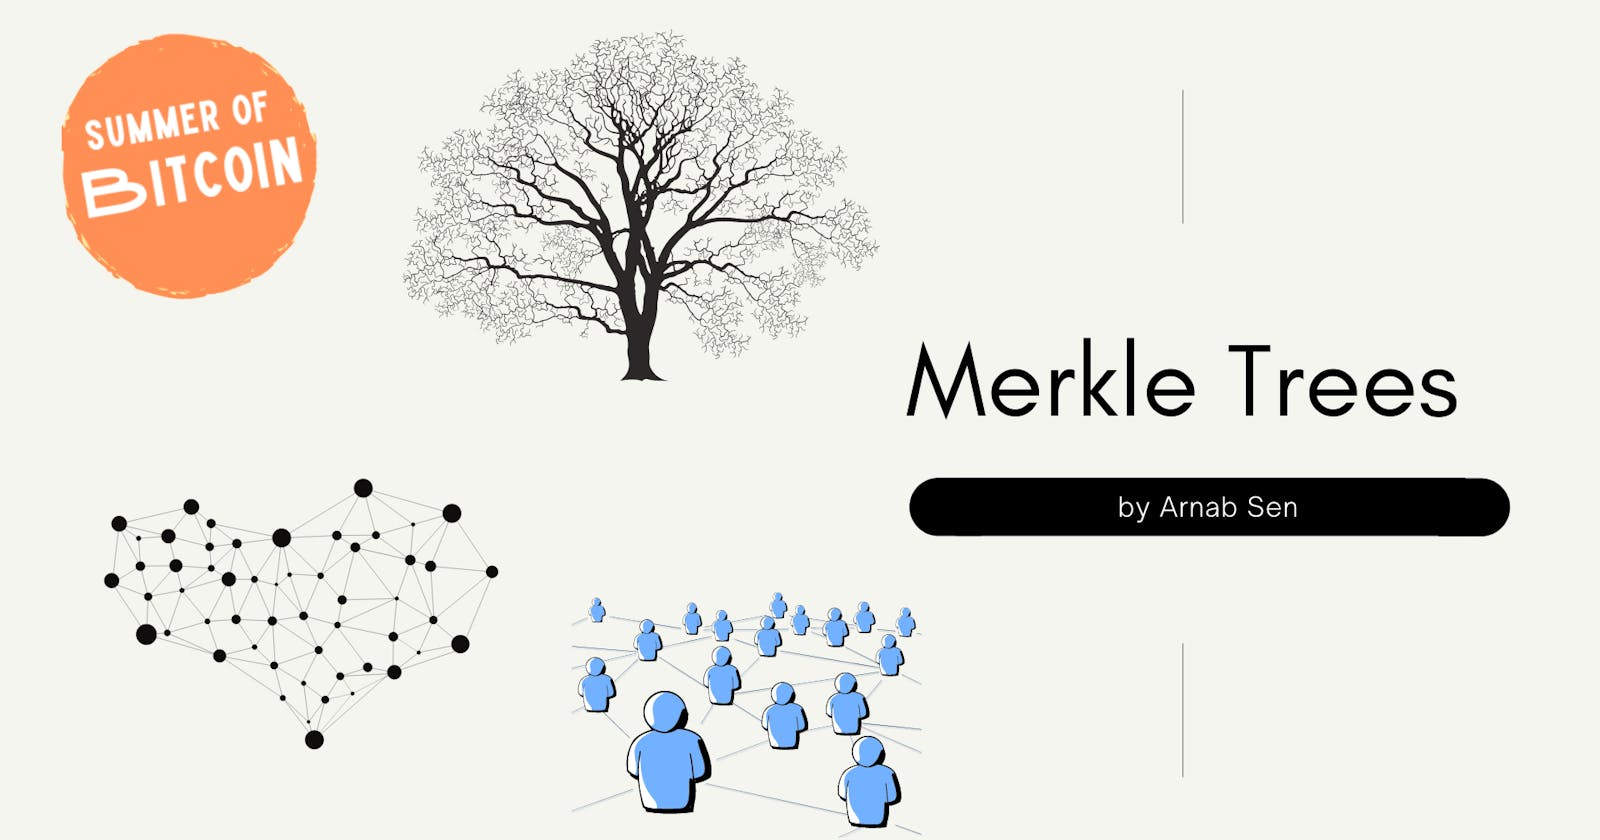 Merkle Trees and its role in the decentralized web